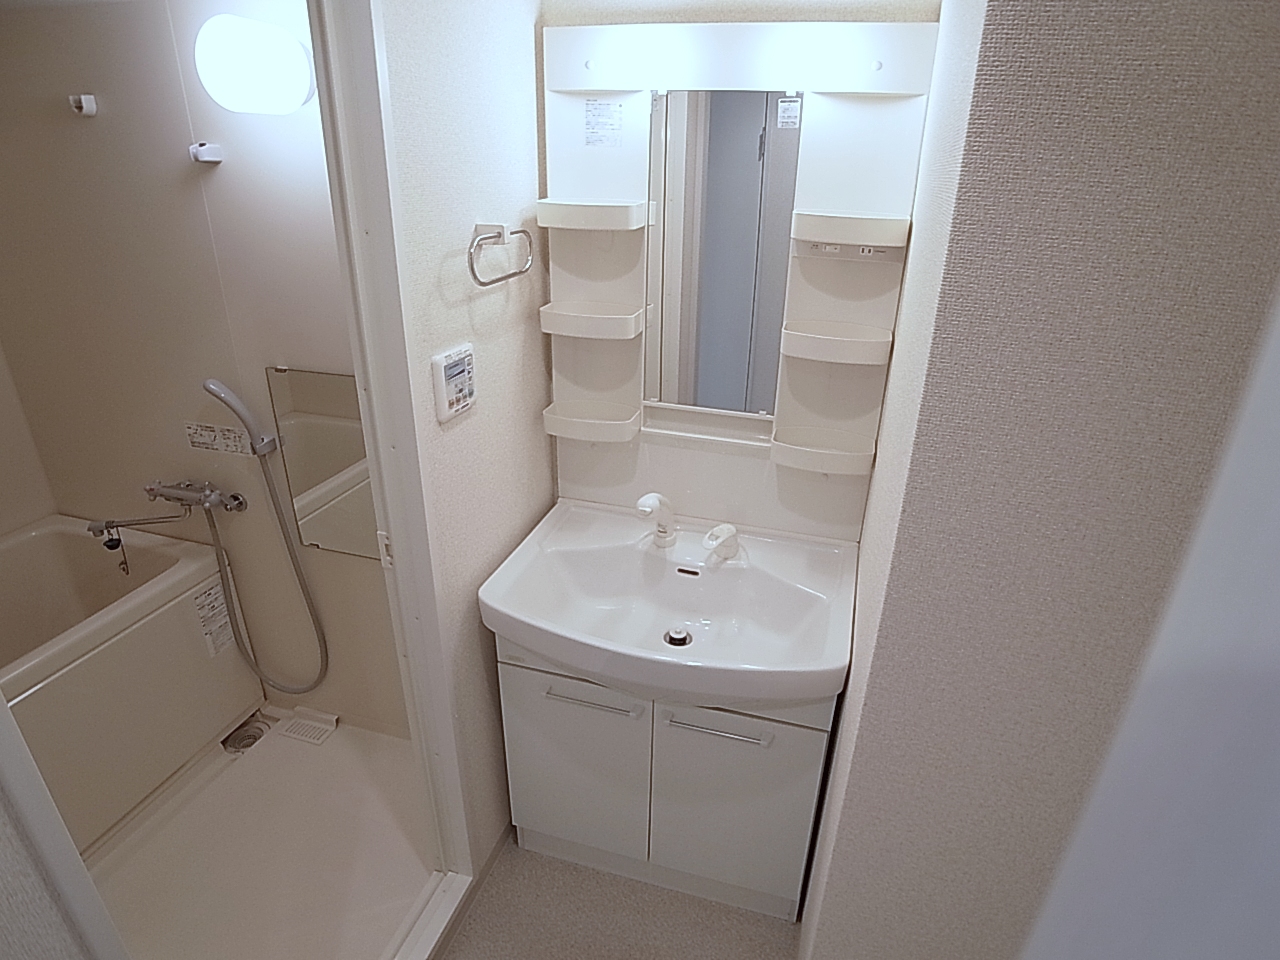 Washroom. Independent basin of shampoo dresser equipped ・ It is equipped with dressing room